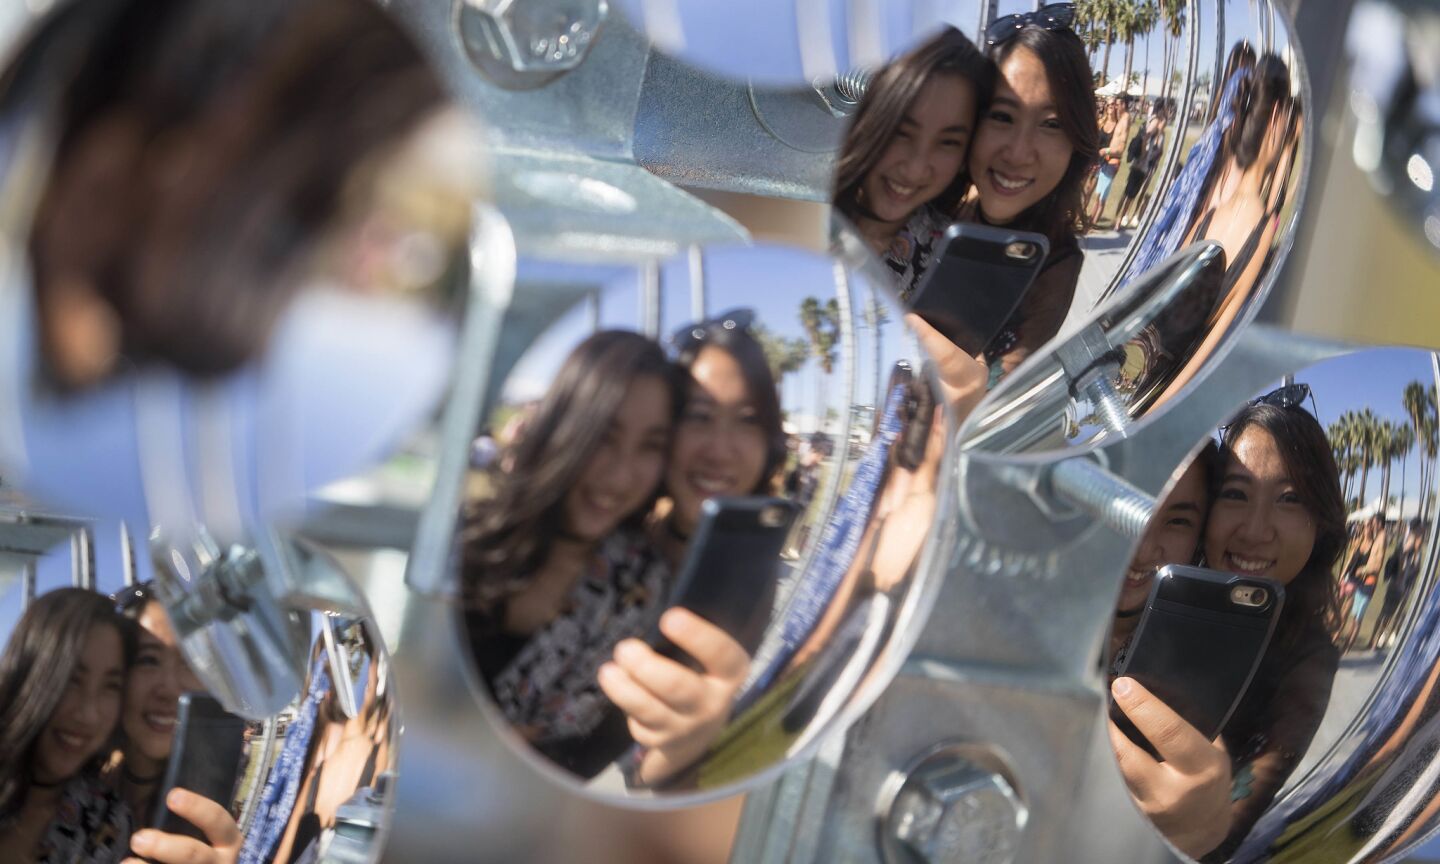 INDIO, CALIF. -- FRIDAY, APRIL 14, 2017: Coachella goers Lexi Tuitan, 22, right, and sister Pia Tuitan, 20, of Manila take photos at the art installation 'Lamp Beside the Golden Door'at the Coachella Music and Arts Festival in Indio, Calif., on April 14, 2017. (Brian van der Brug / Los Angeles Times)